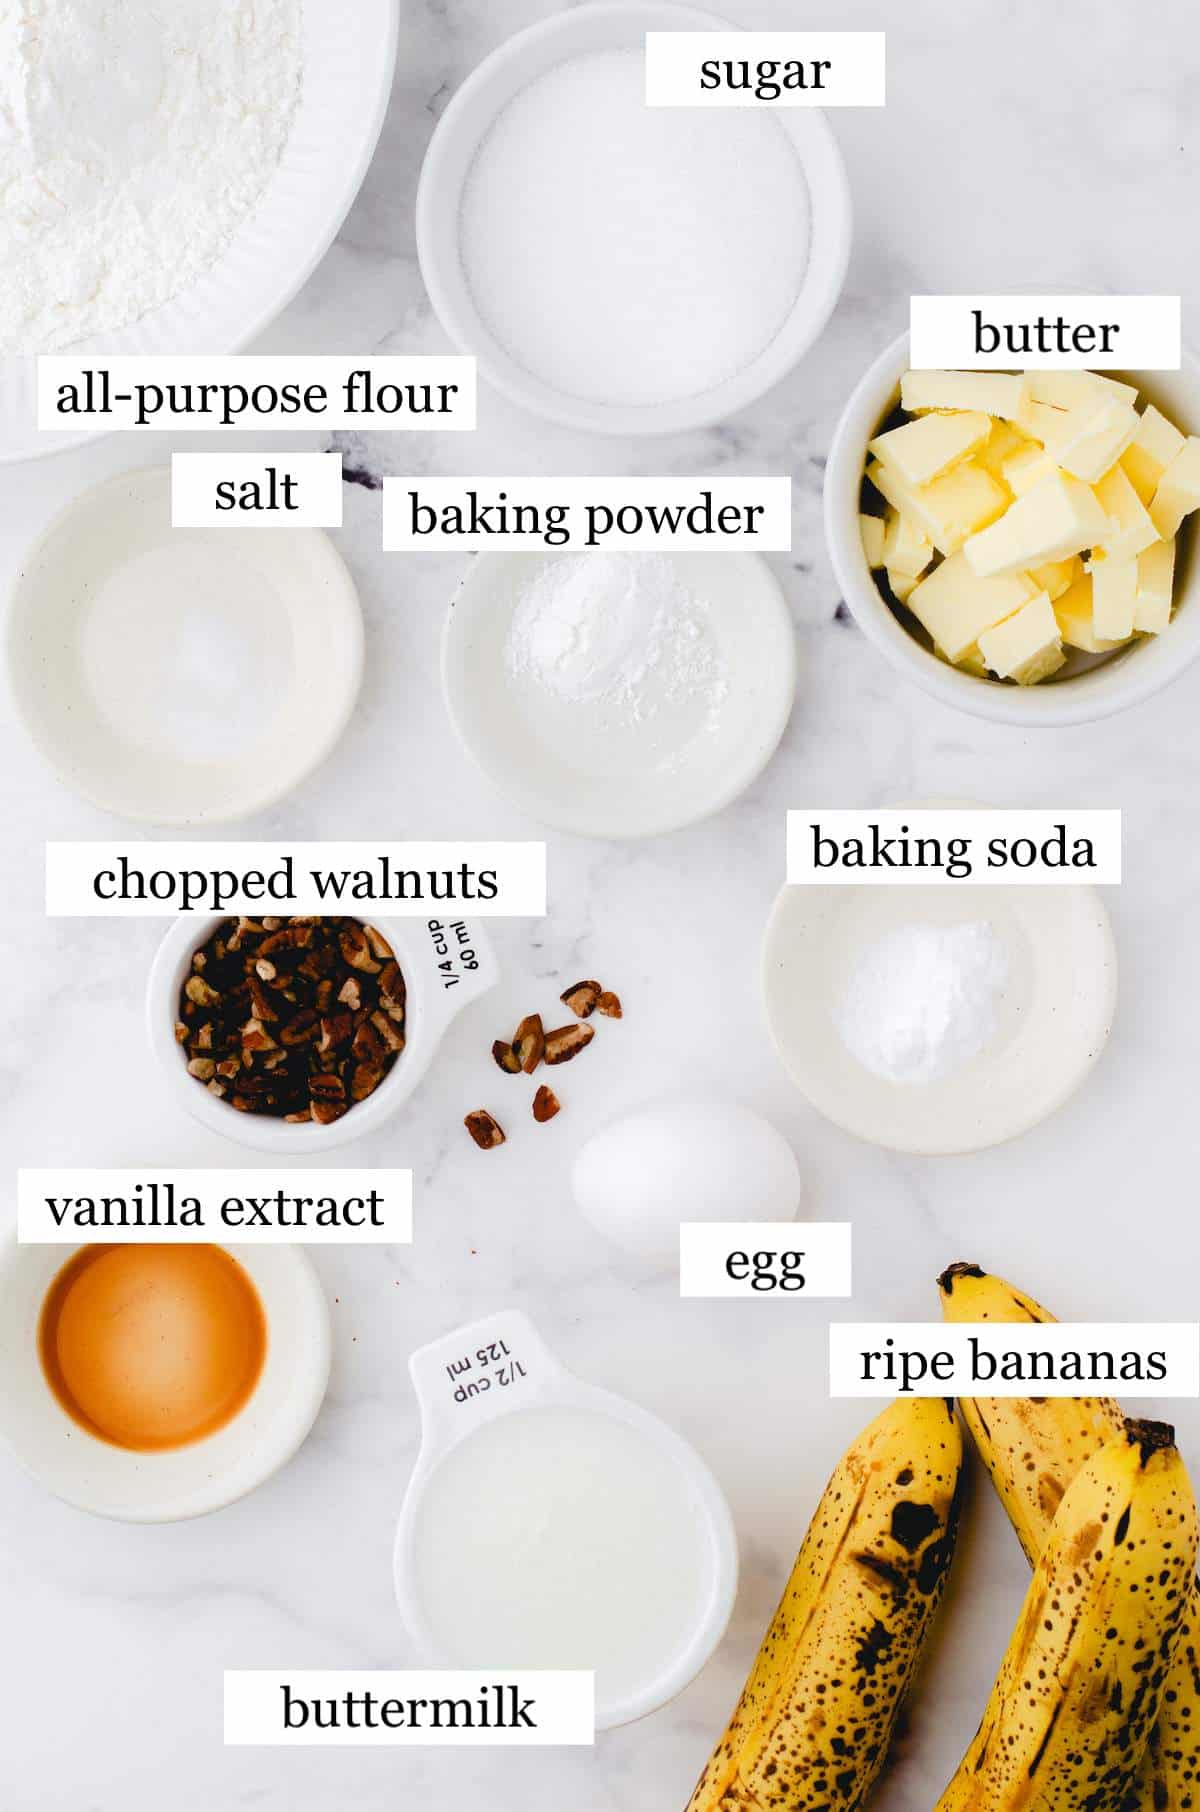 The ingredients in buttermilk banana bread laid out and labeled.